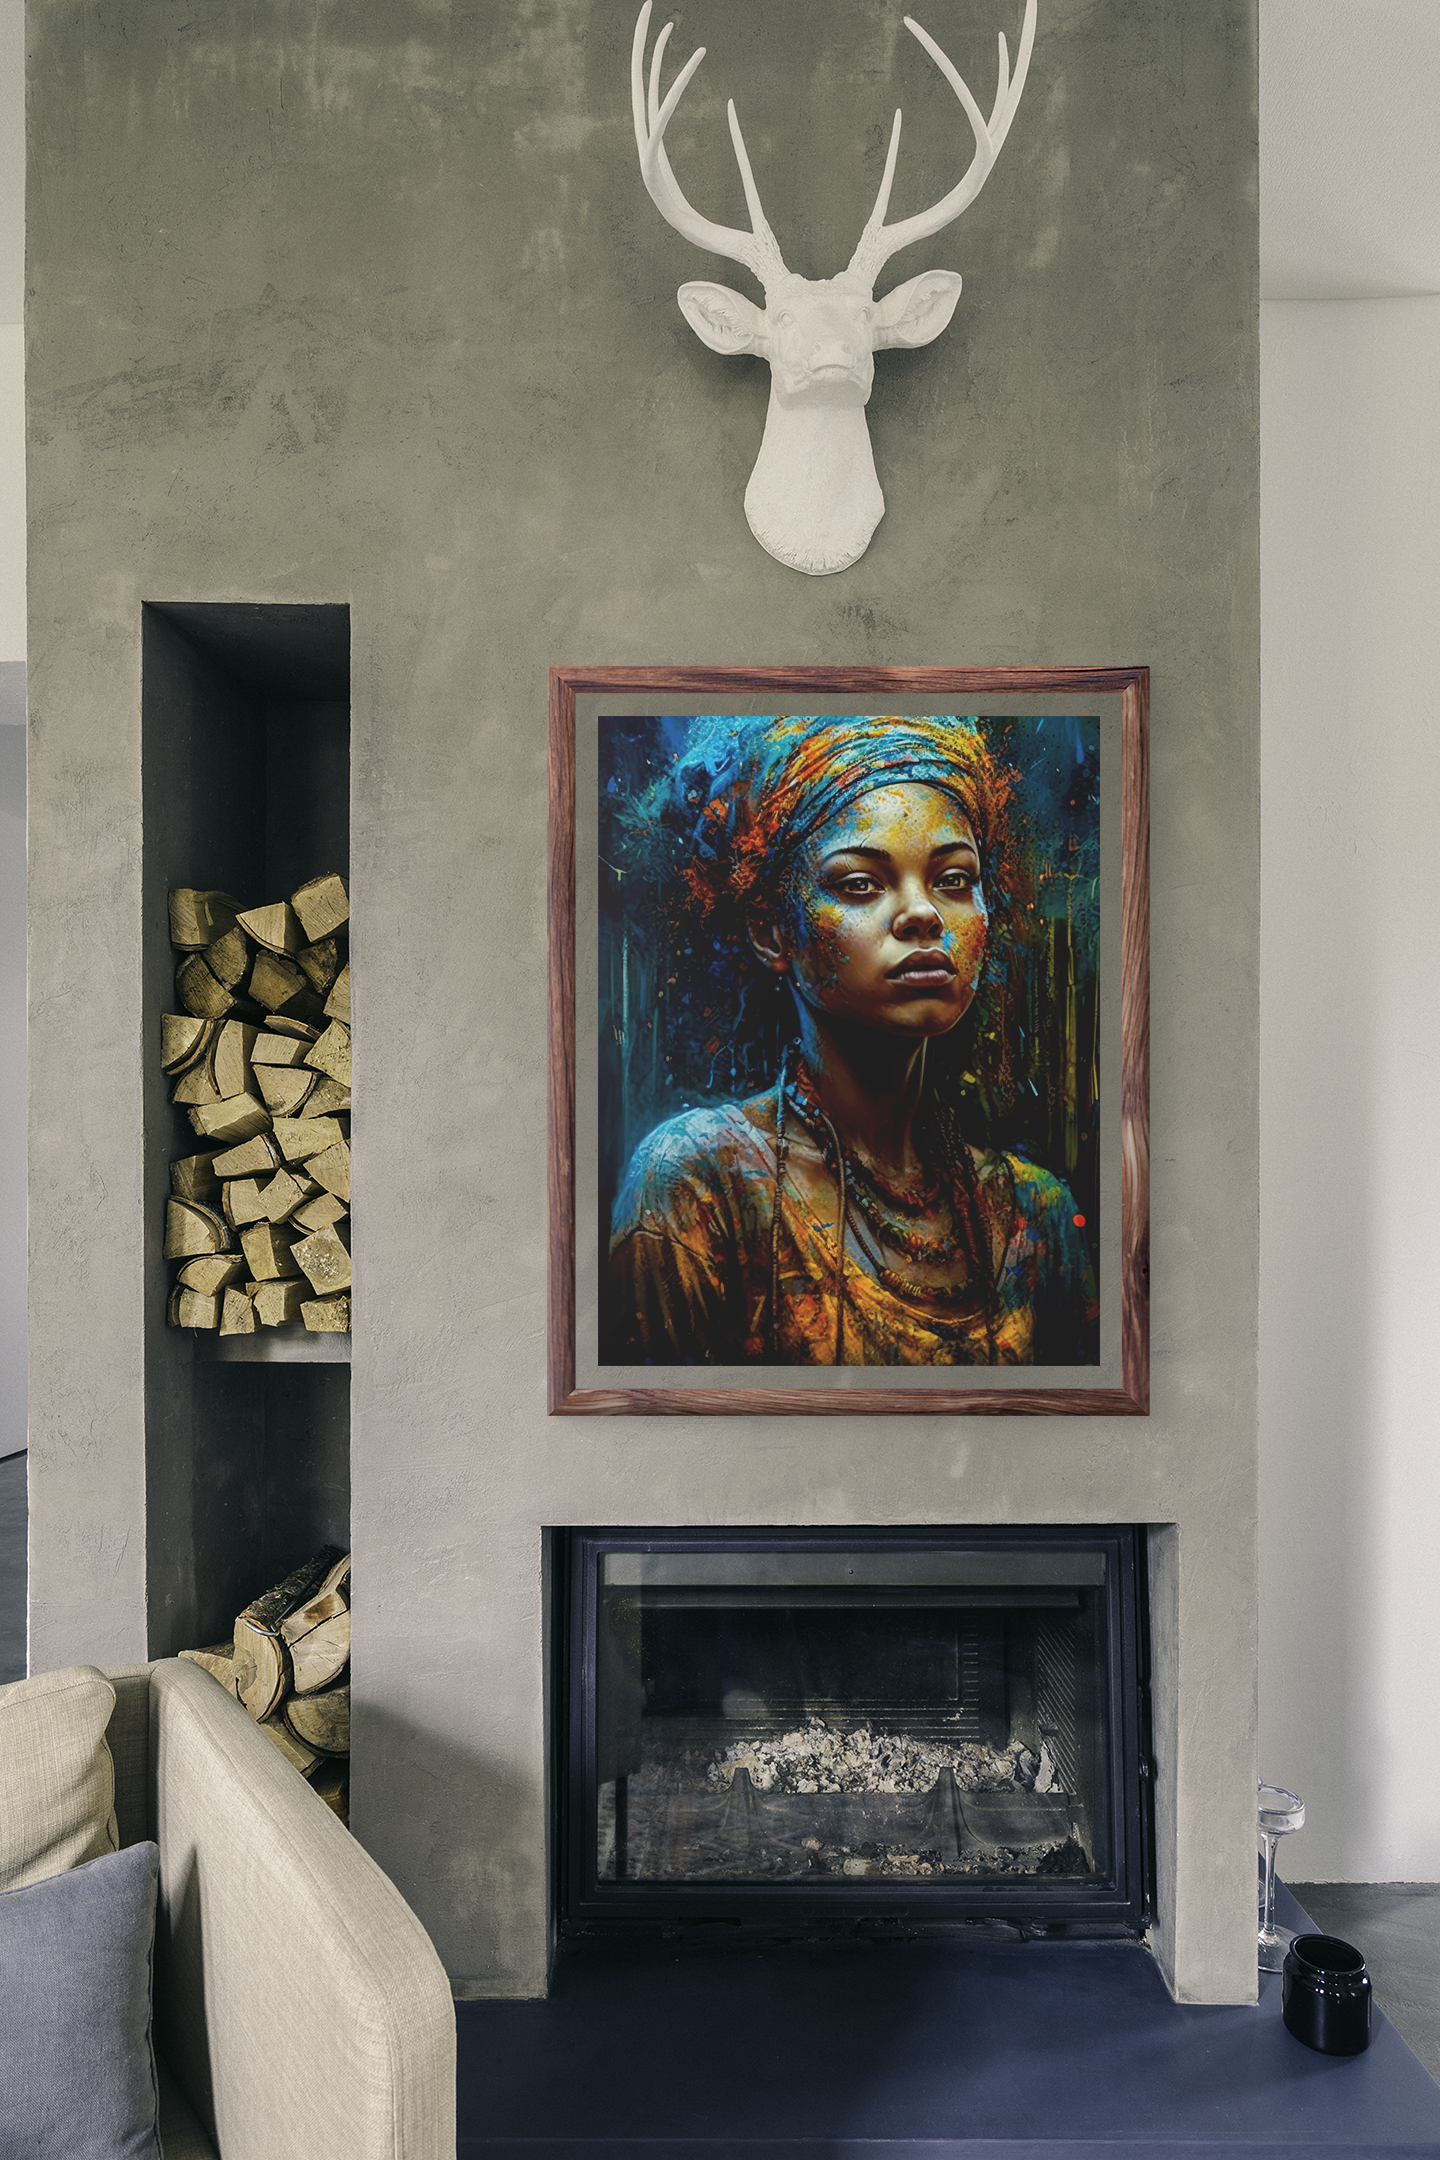 "THE BLUE WOMAN" - African American Themed Poster Wall Art